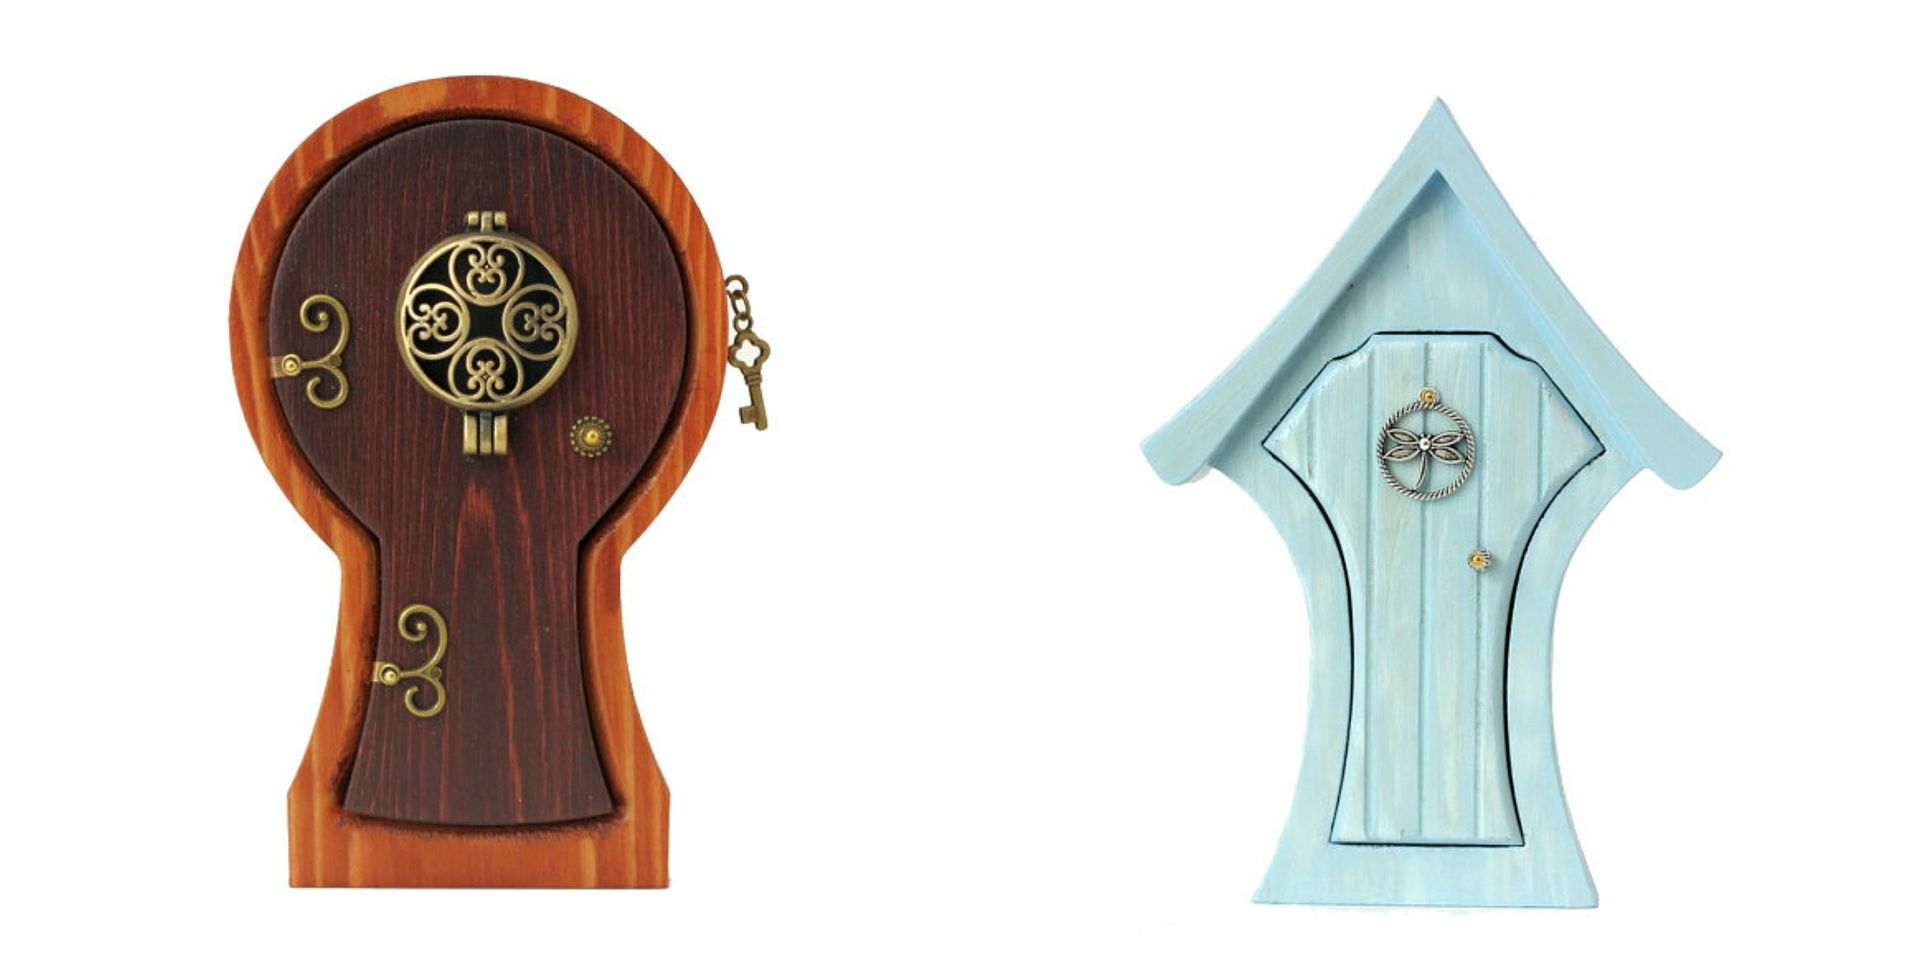 How cute are these itsy bitsy fairy doors we found on Etsy? Imagination at its best.